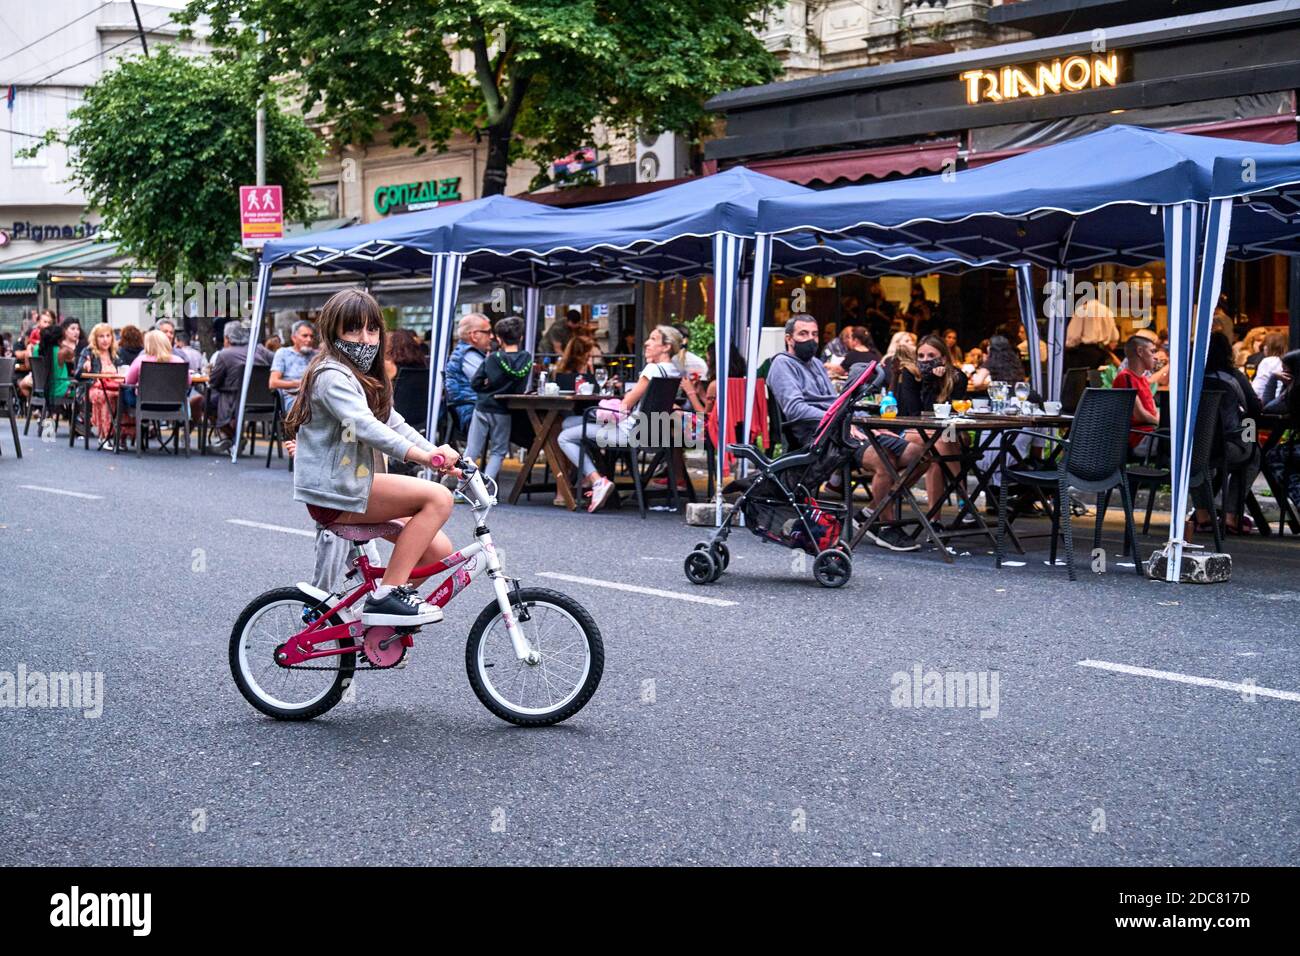 Buenos aires / Argentina; Nov 14, 2020: Girl riding a bike with a protective face mask, and people eating outdoors. New normalcy during the coronaviru Stock Photo